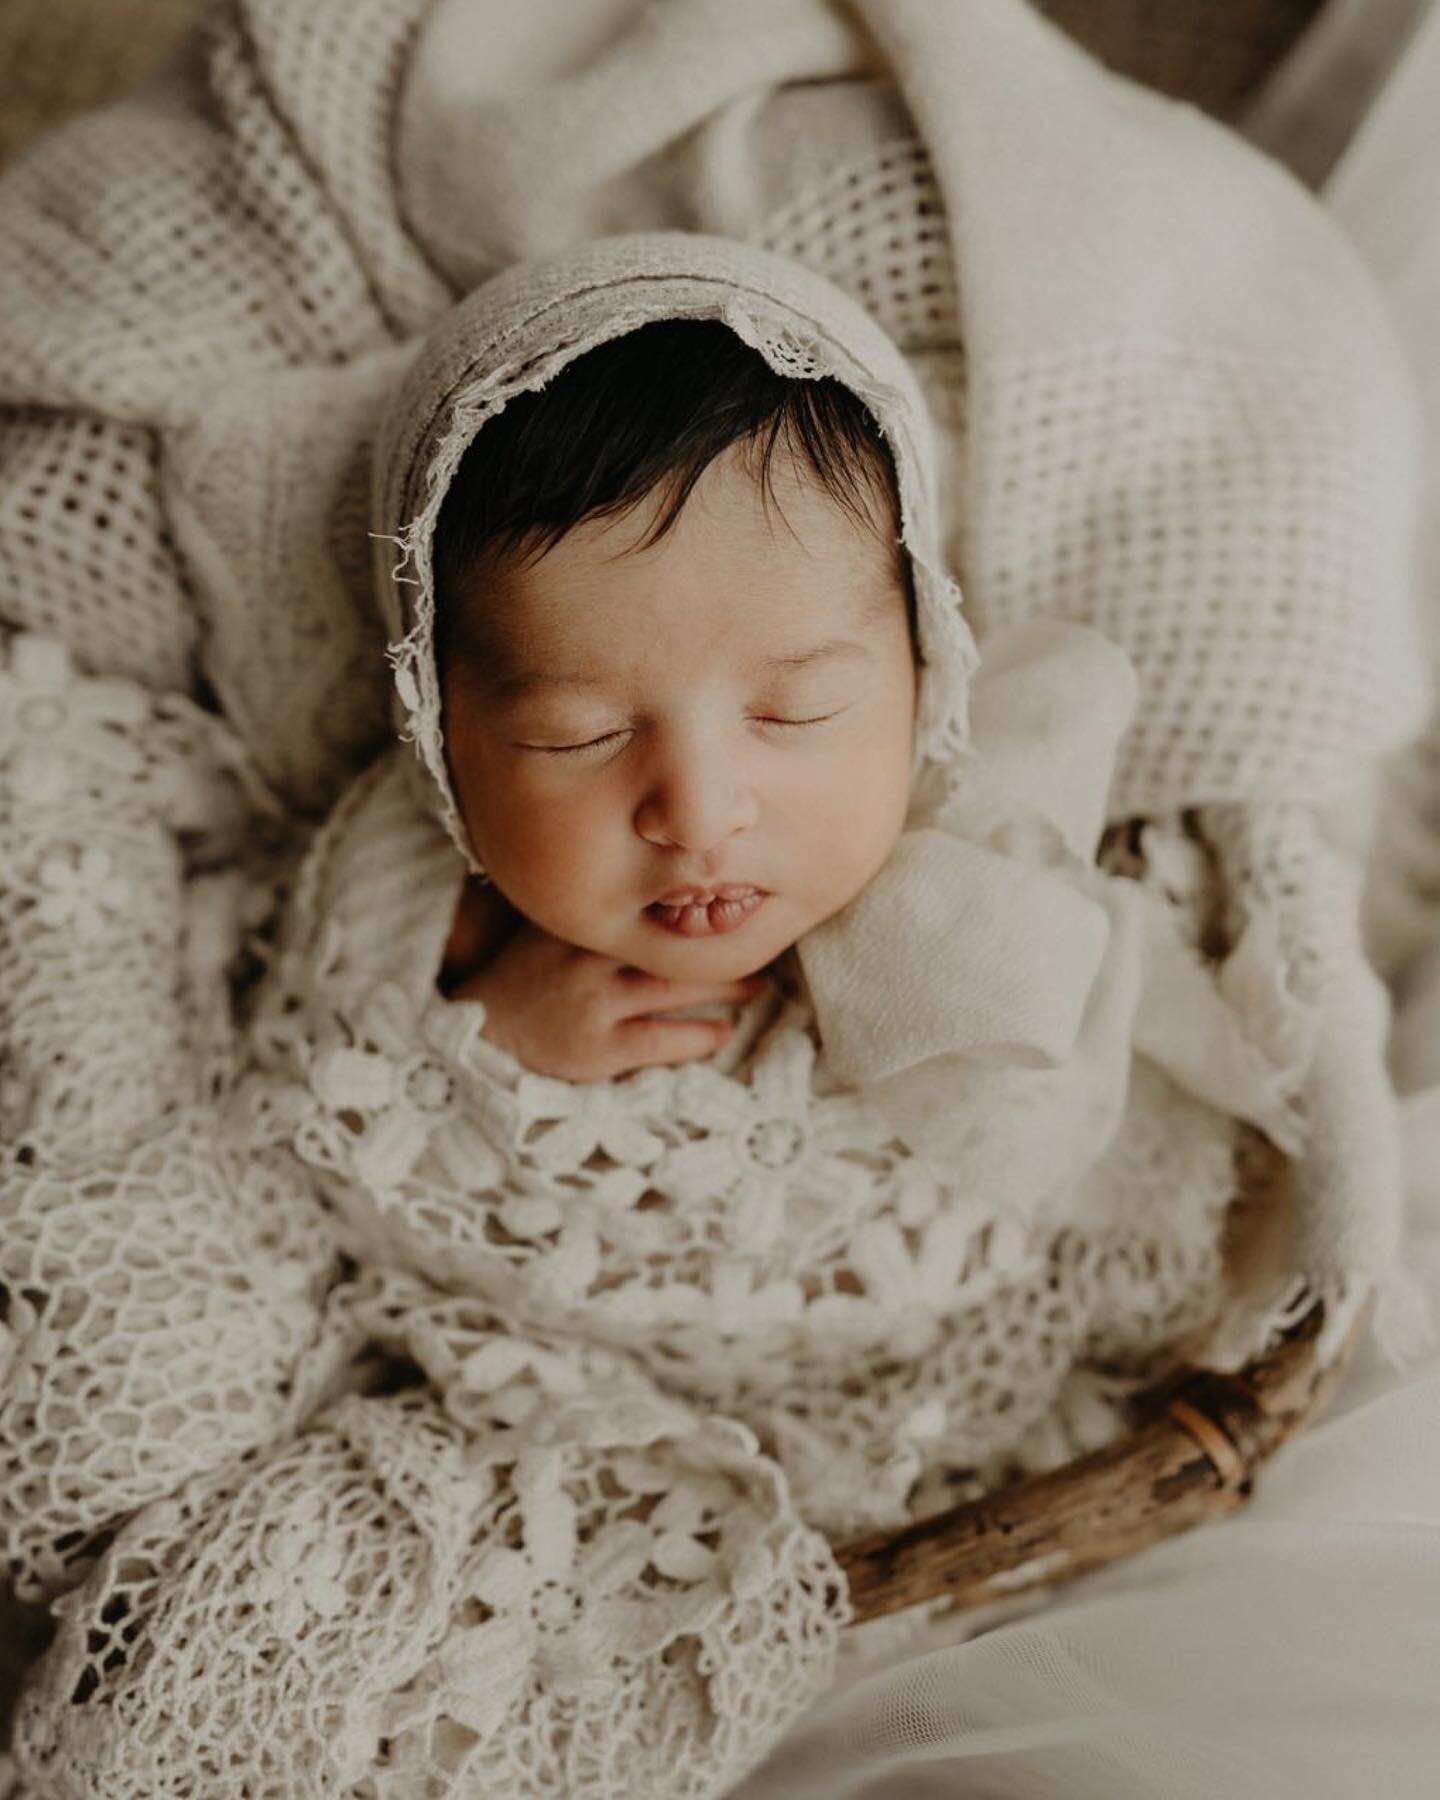 All this sweetness bundled up in perfection!🖤
.
.
.
Layer: @awrinkleintimeprops 
.
.
.
.
#newbornphotography #newbornphotographer #metrodetroitnewbornphotographer #newbornphoto 
#familyphotographer&nbsp;#metrodetroitphotographer&nbsp;#metrodetroitph